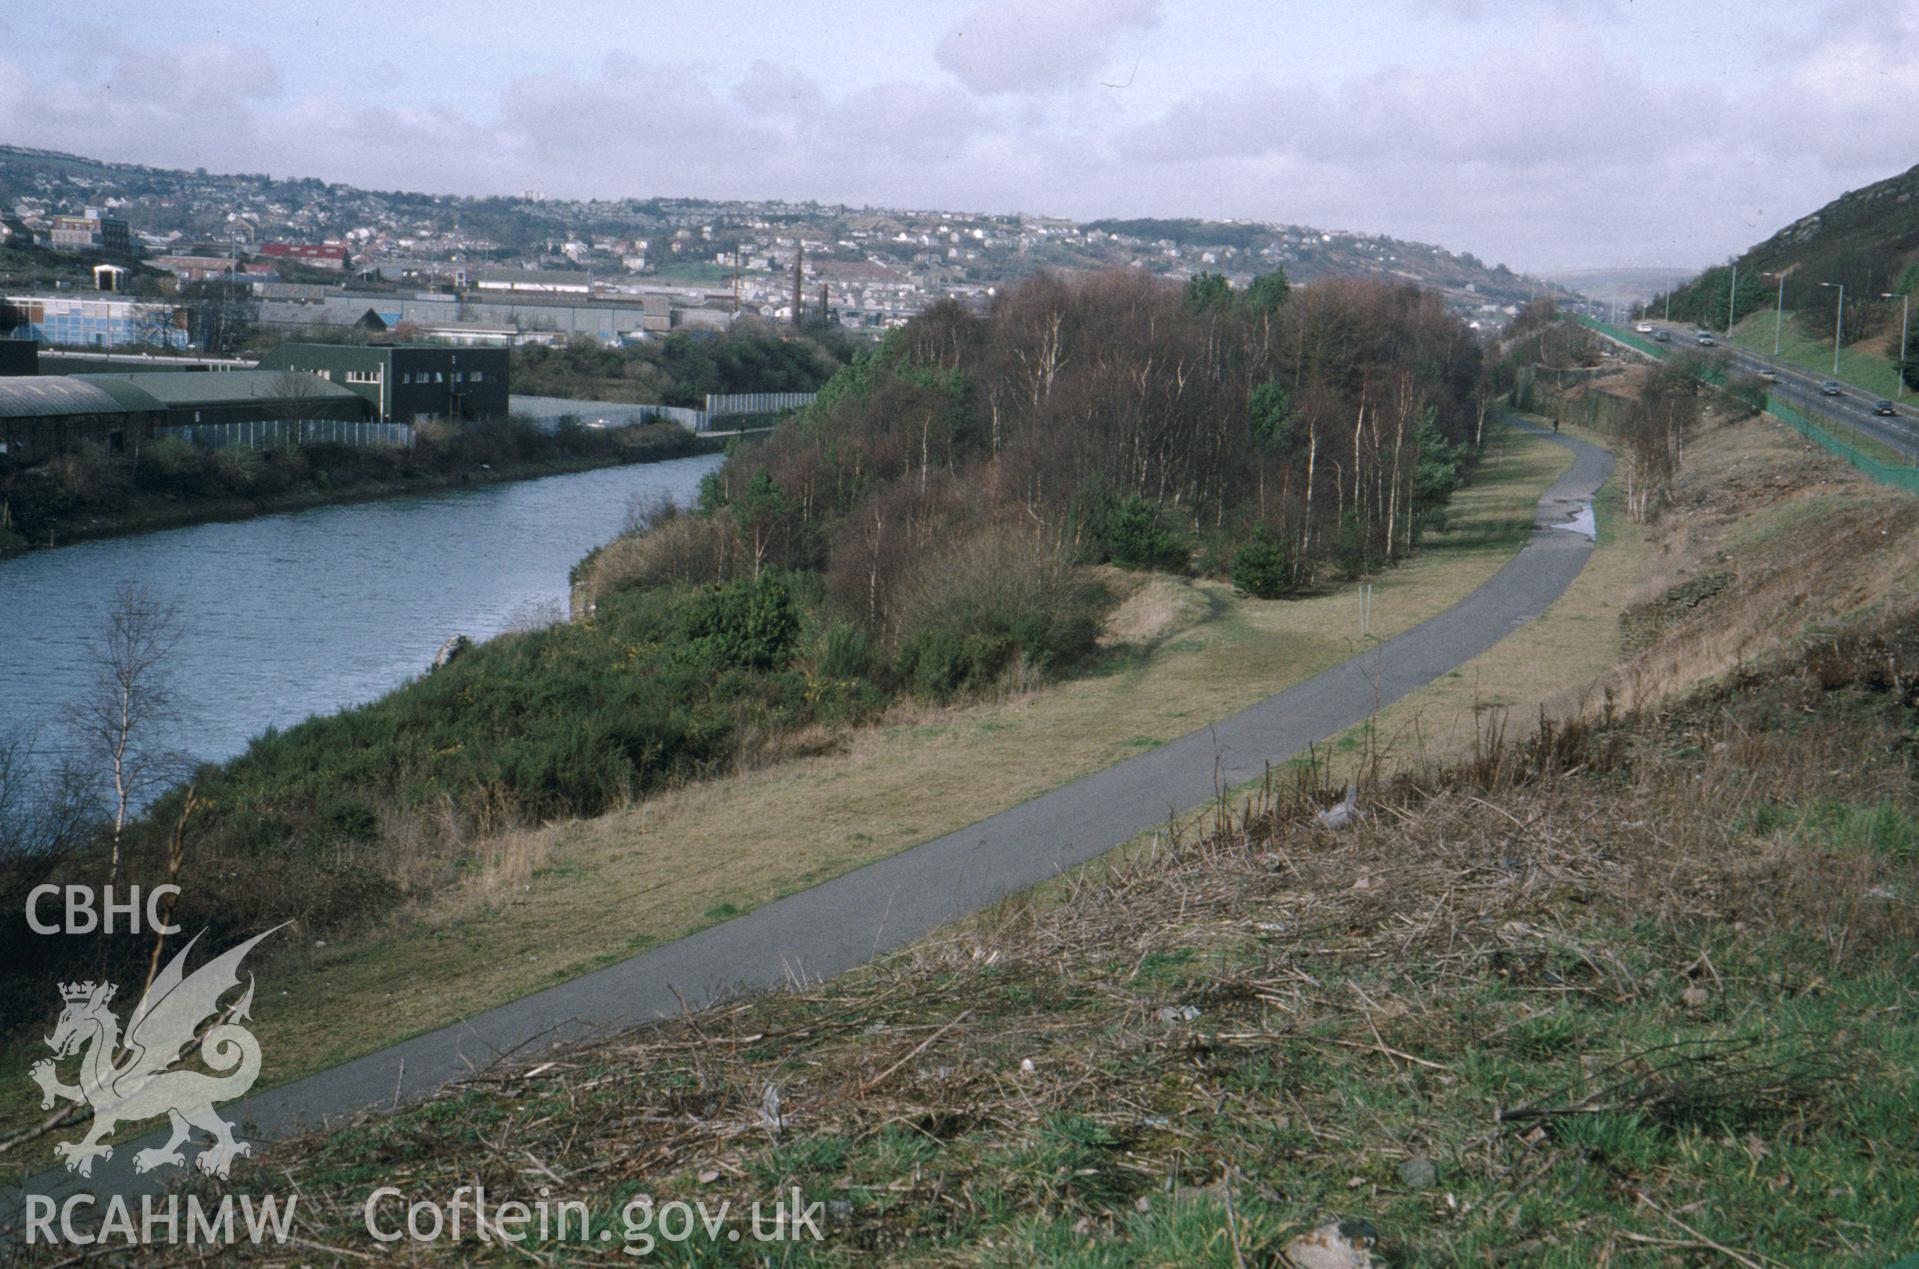 Colour slide of the cycle-path on the line of Smith's Canal, with the Tipping Staithes to the left (west) of the photograph.